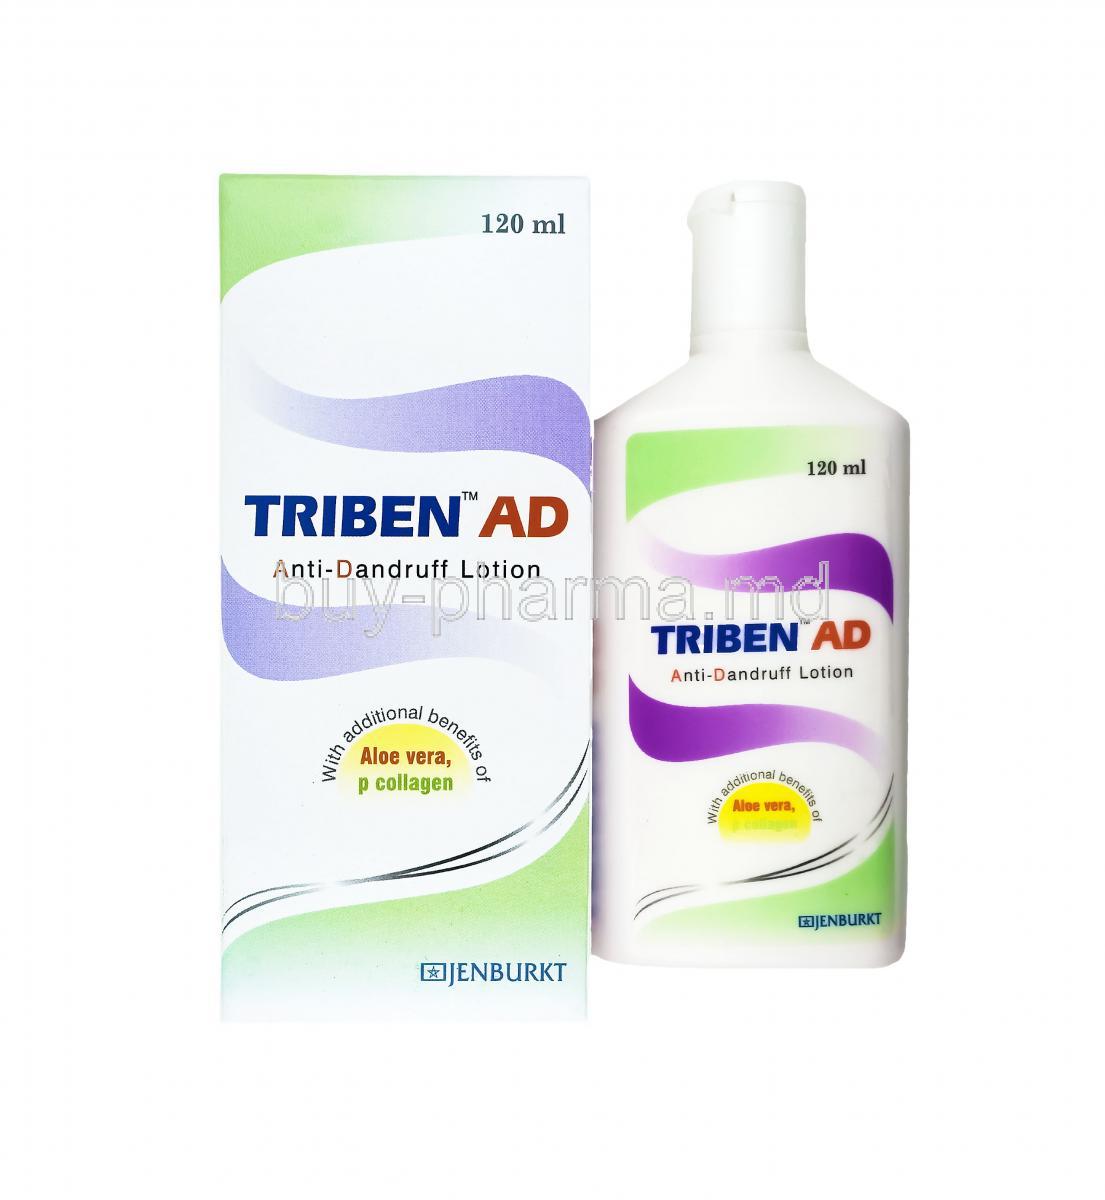 Triben AD Lotion, Ketoconazole Topical and Zinc pyrithione